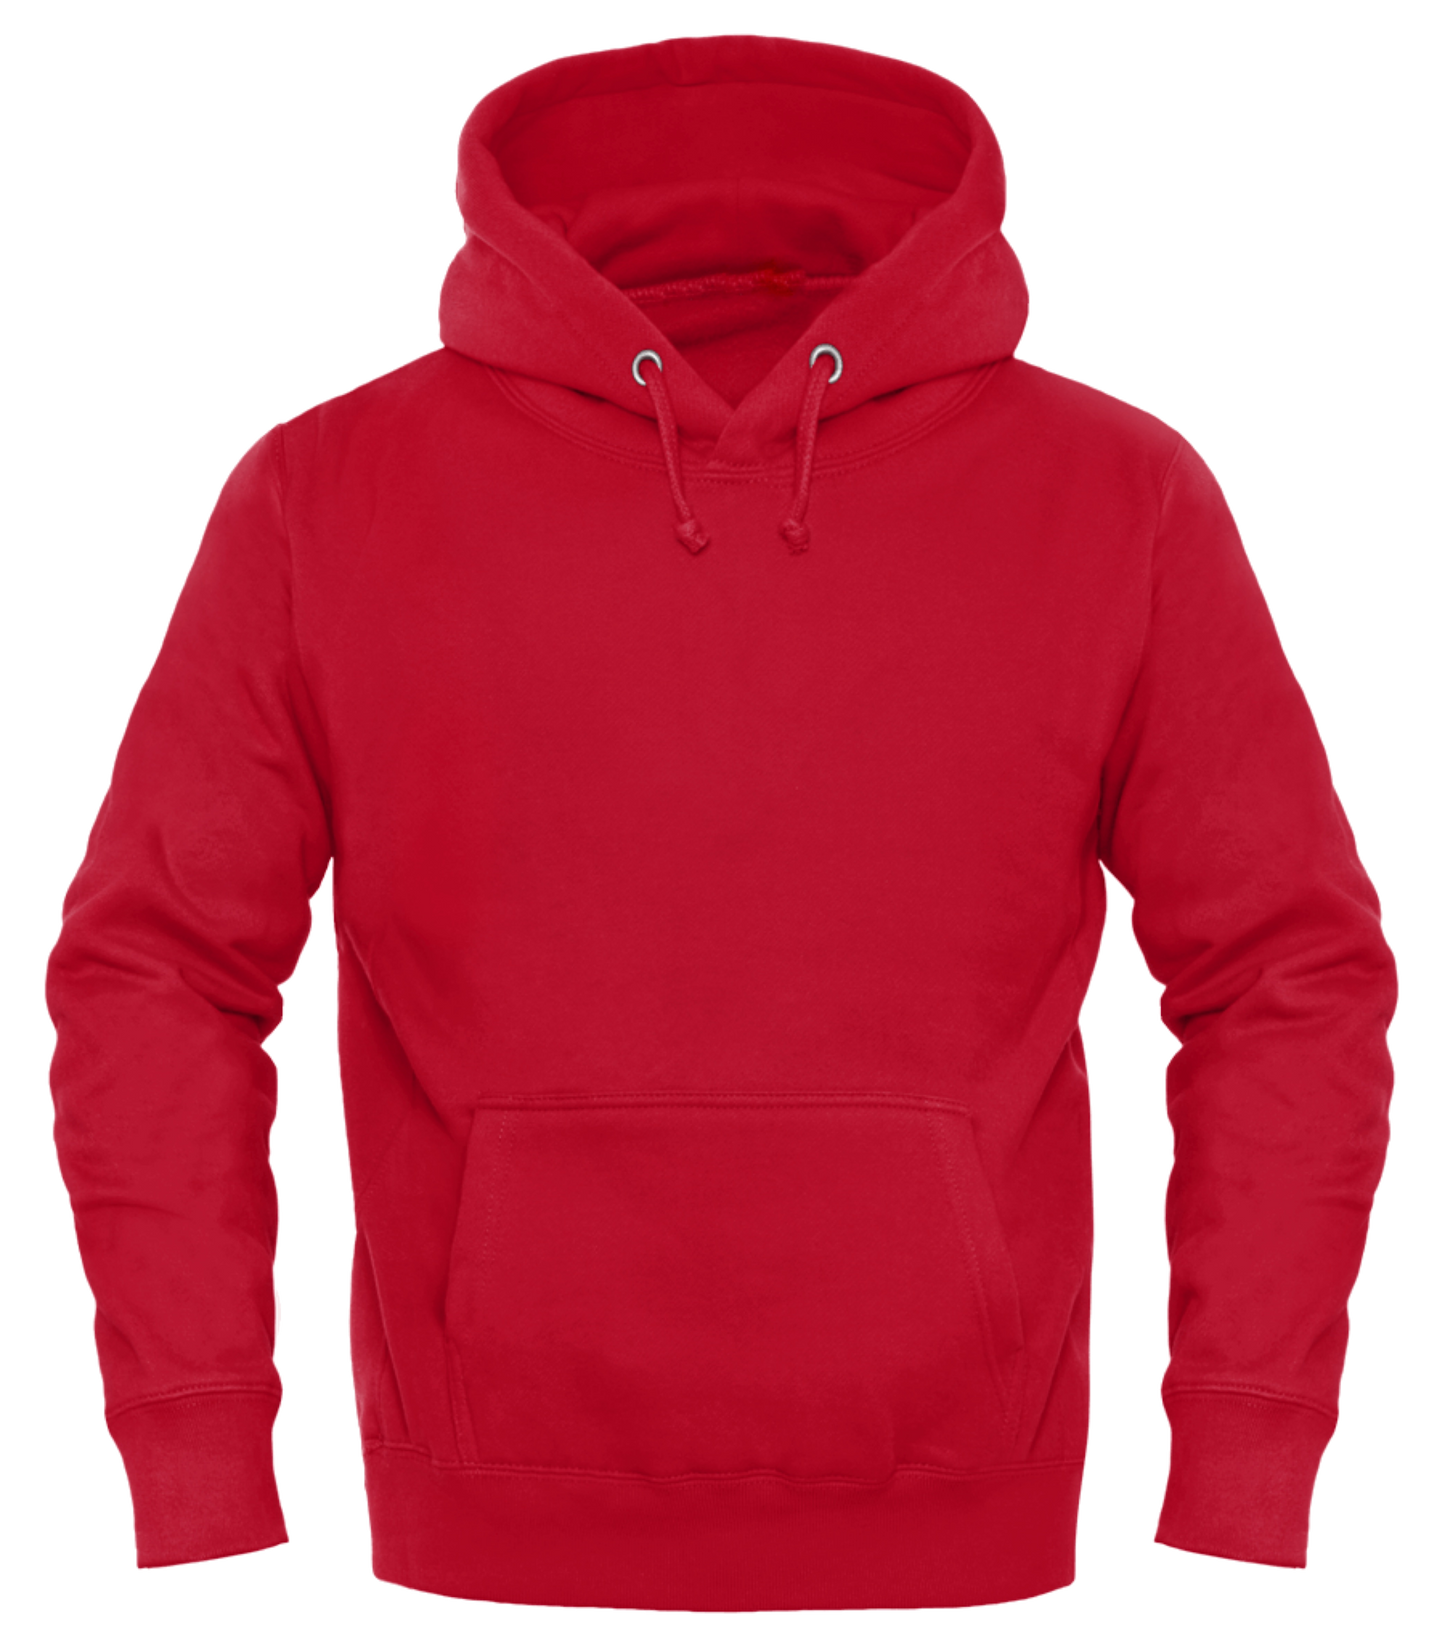 Solid Color Hoodie for Unisex Adult using Gildan